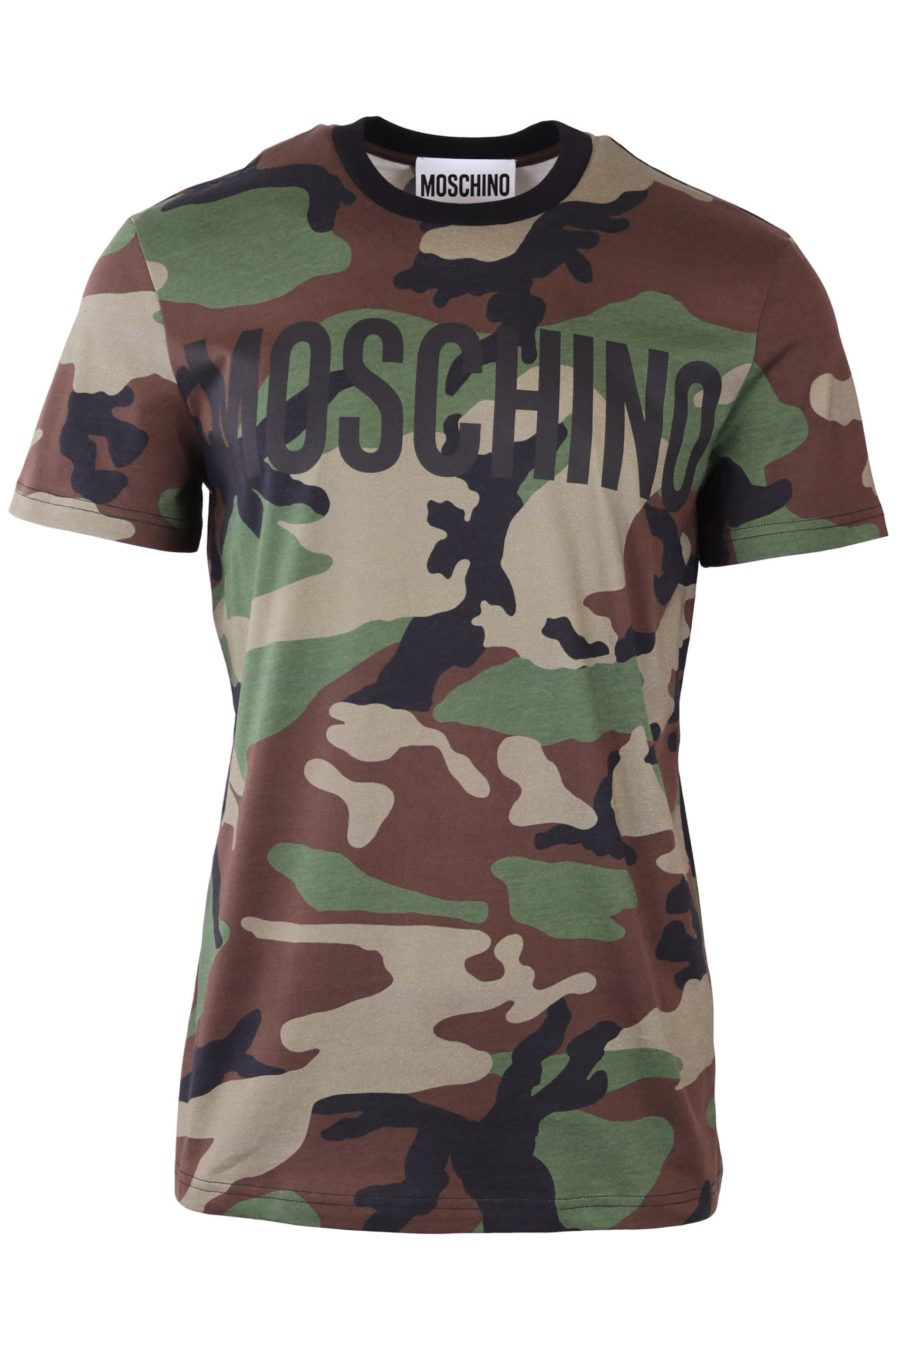 Moschino Couture military T-shirt with logo - IMG 6538 scaled